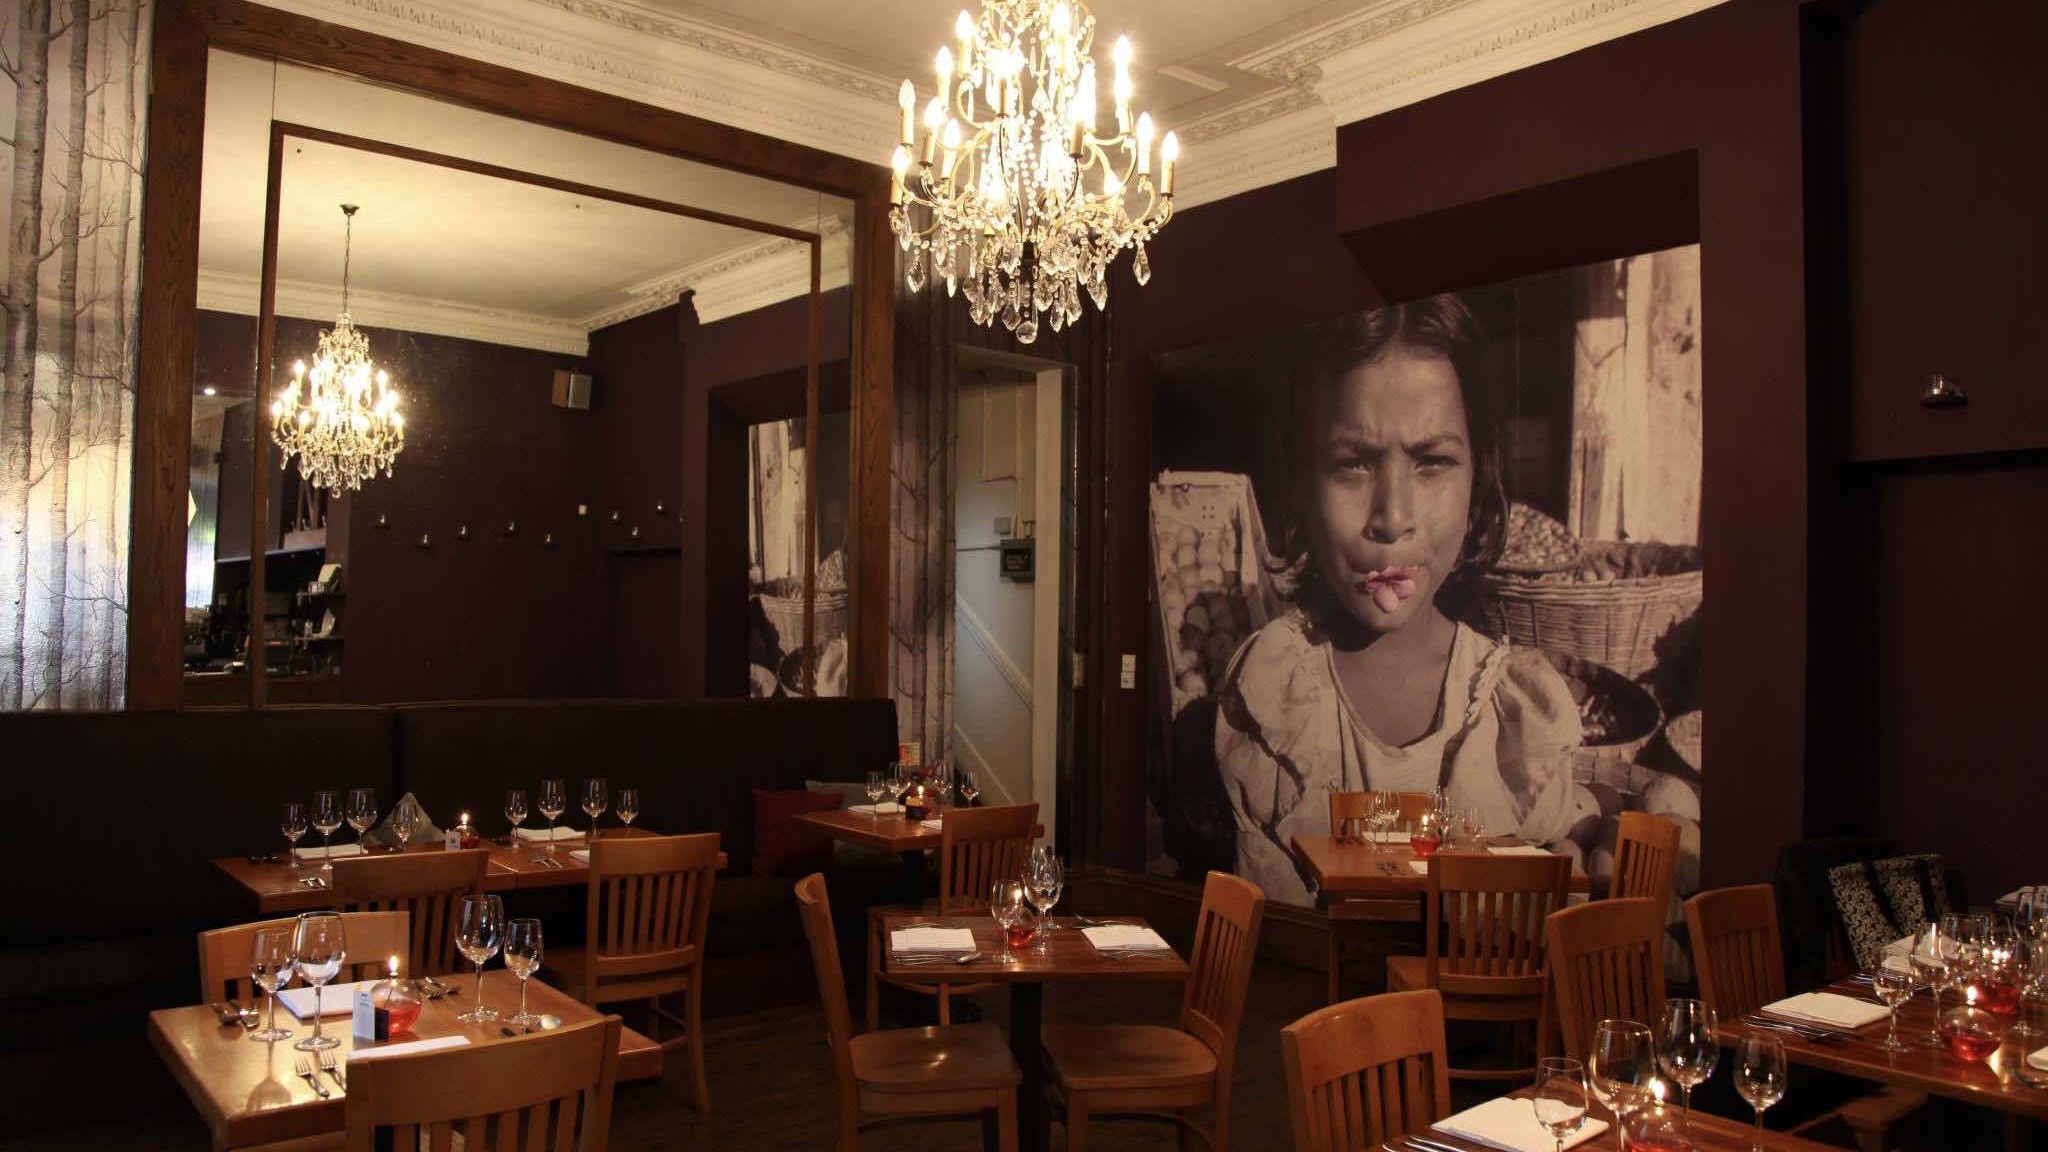 Indian Summer is one of the best brighton resraurants interior with tables and wall art